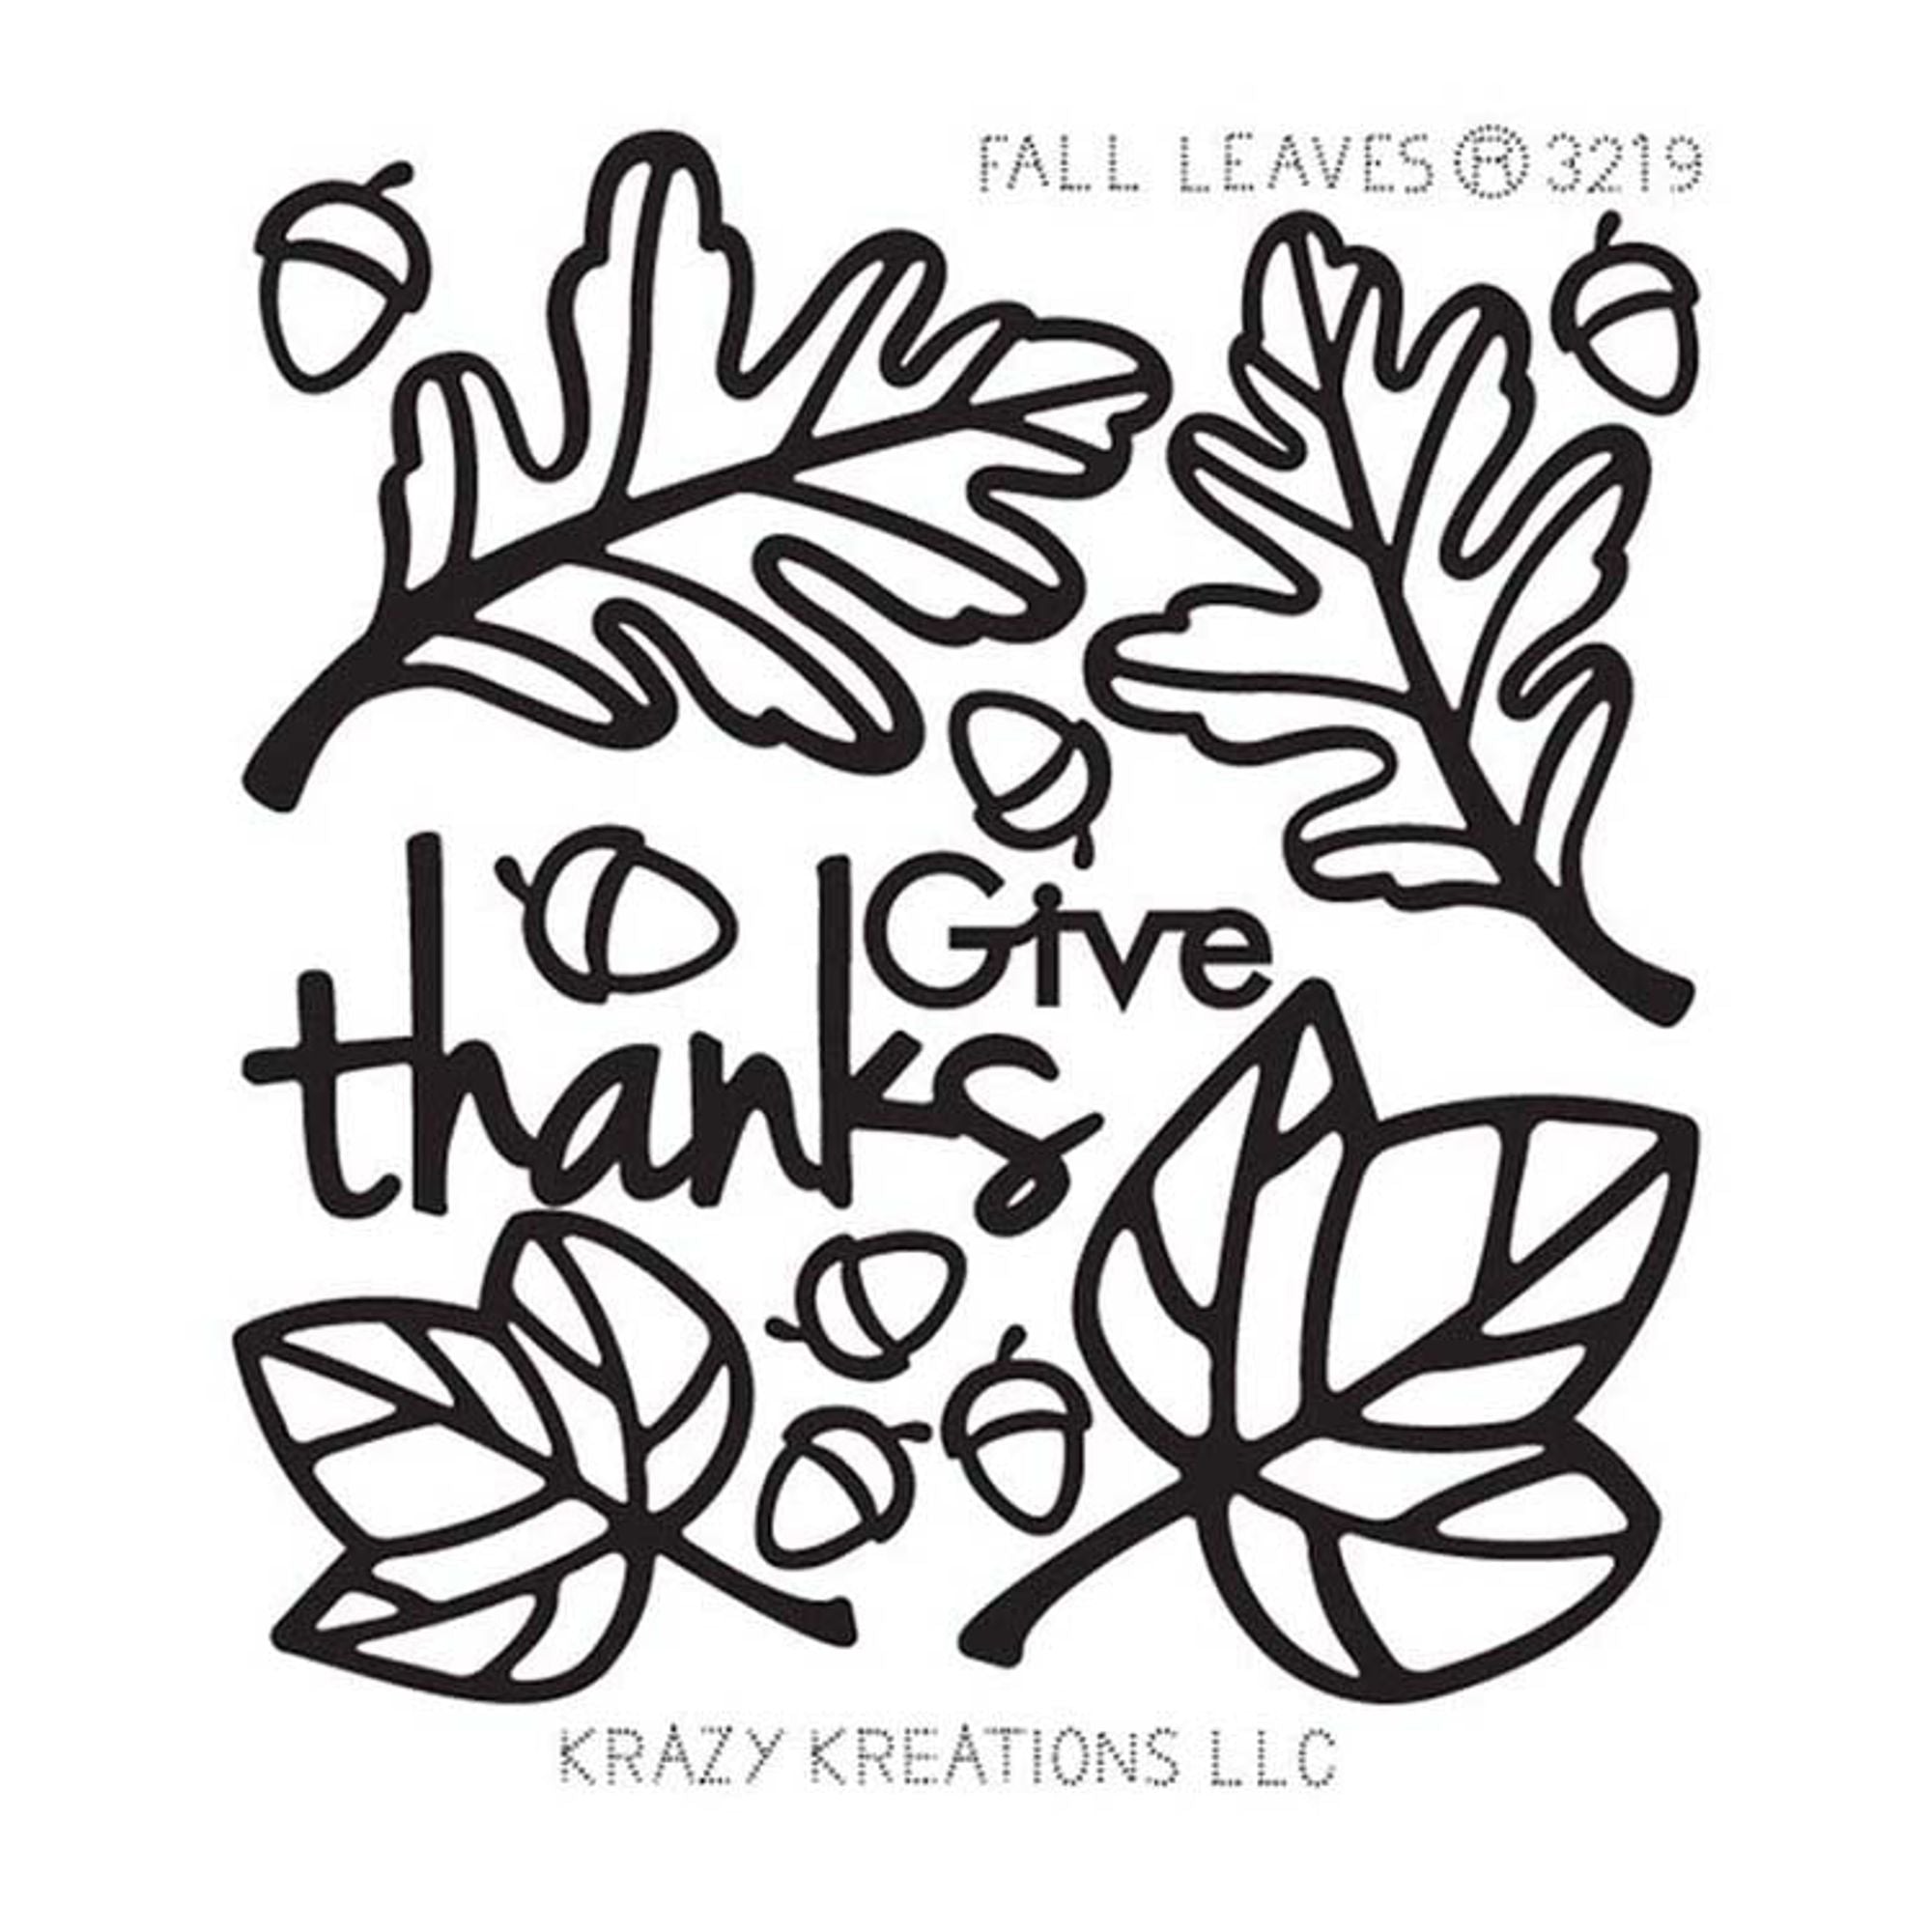 Krazy Kreations Double Stick Sticker - Fall Leaves